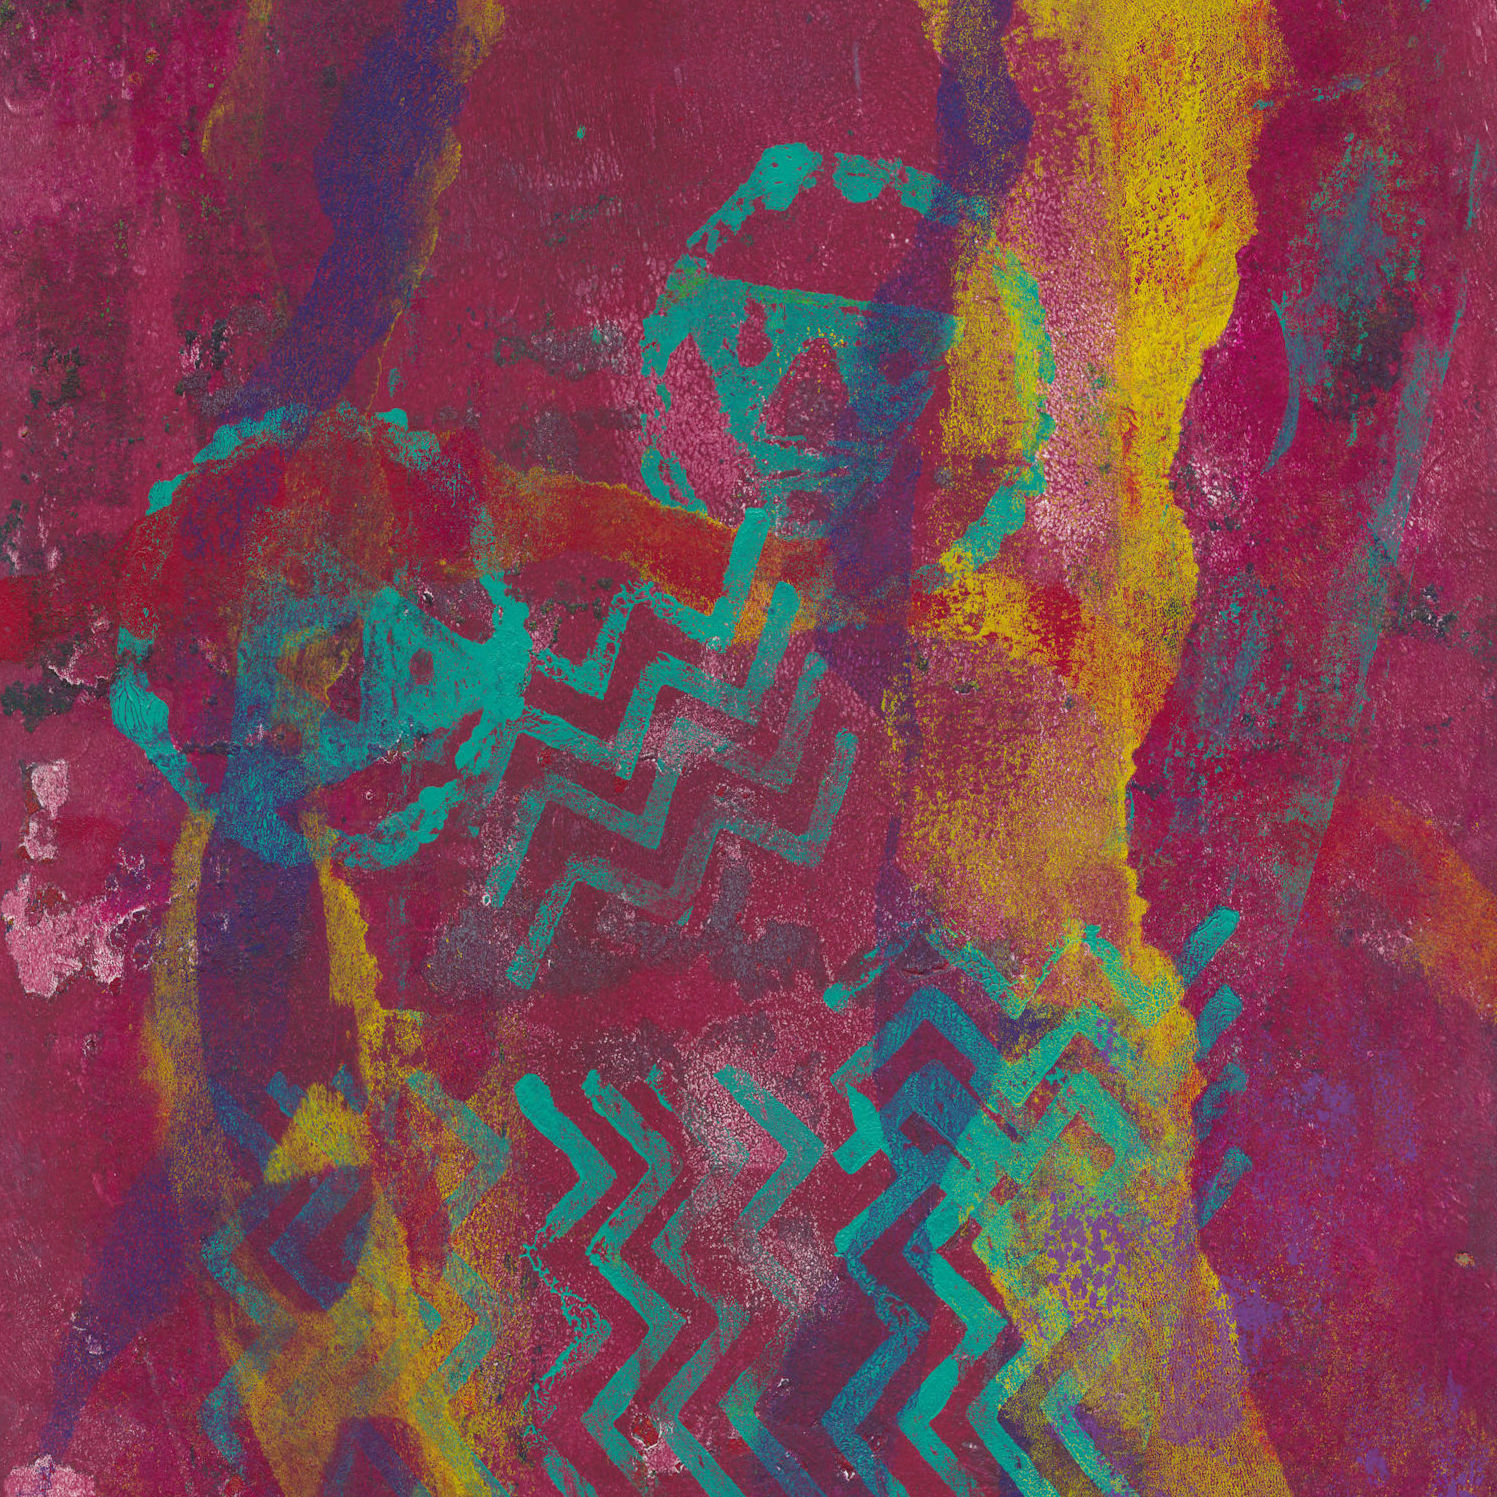 Pictographs - monotype print inspire by Native America pictographs